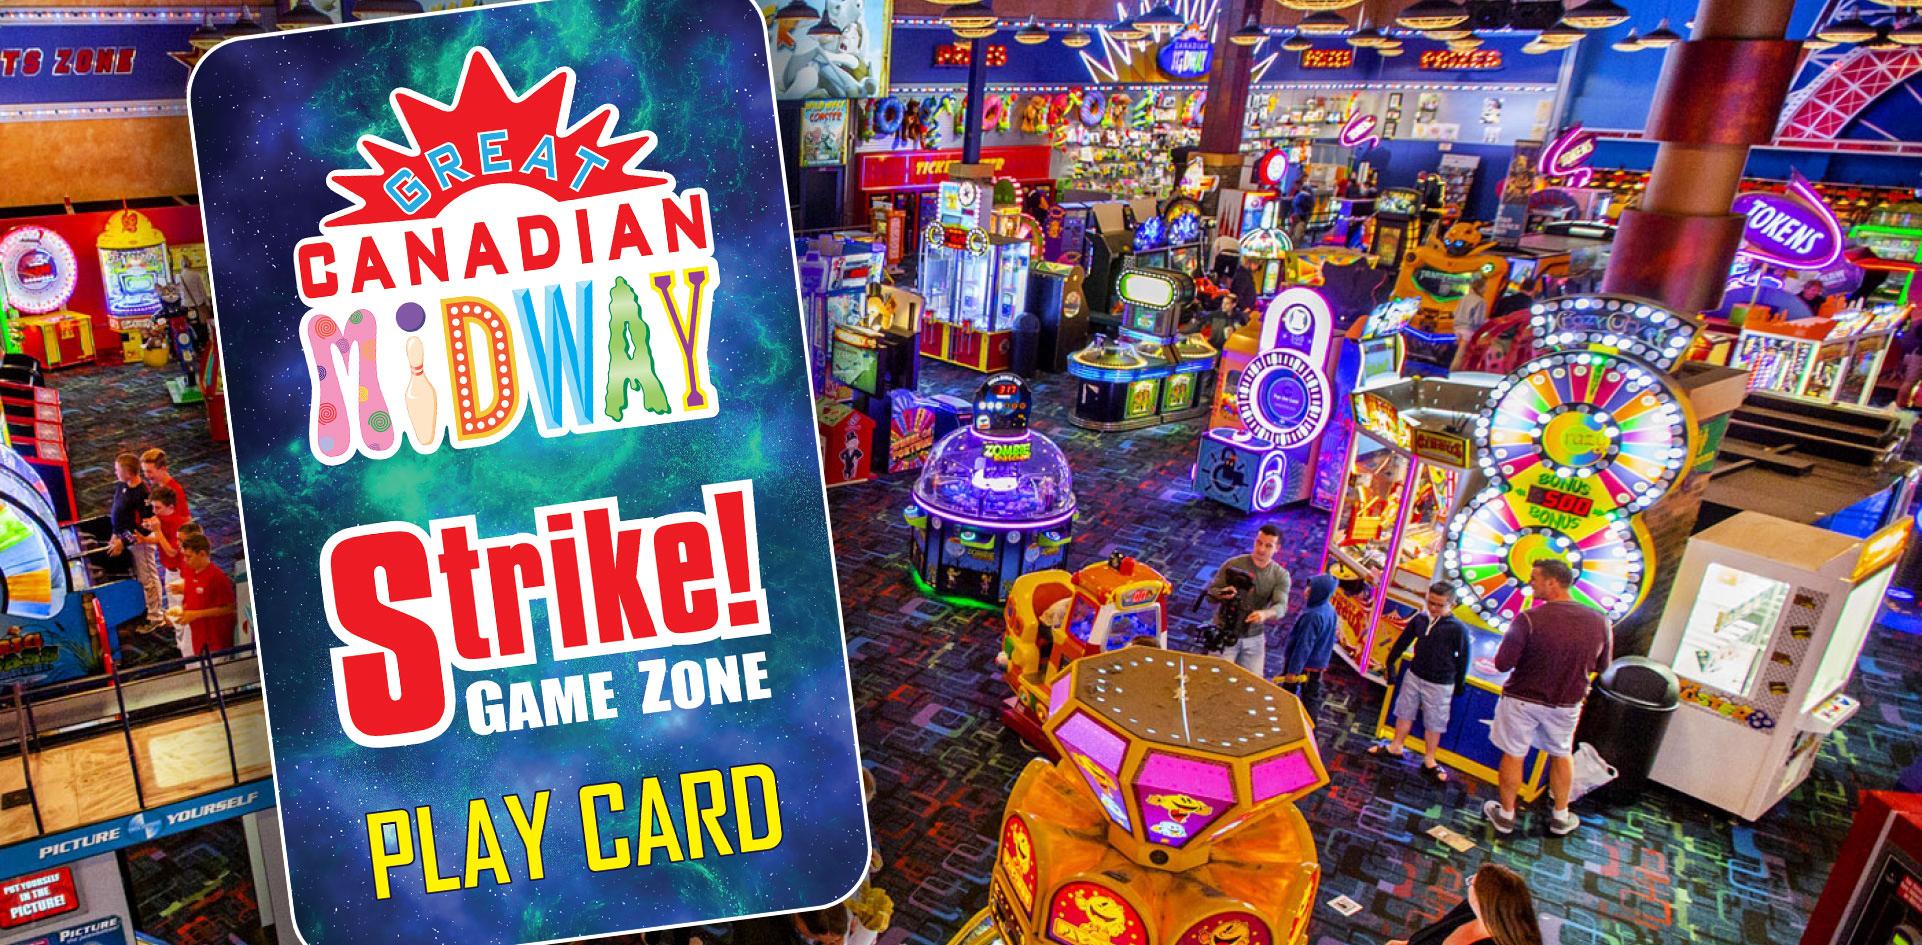 Great Canadian Midway Play Card Offer 